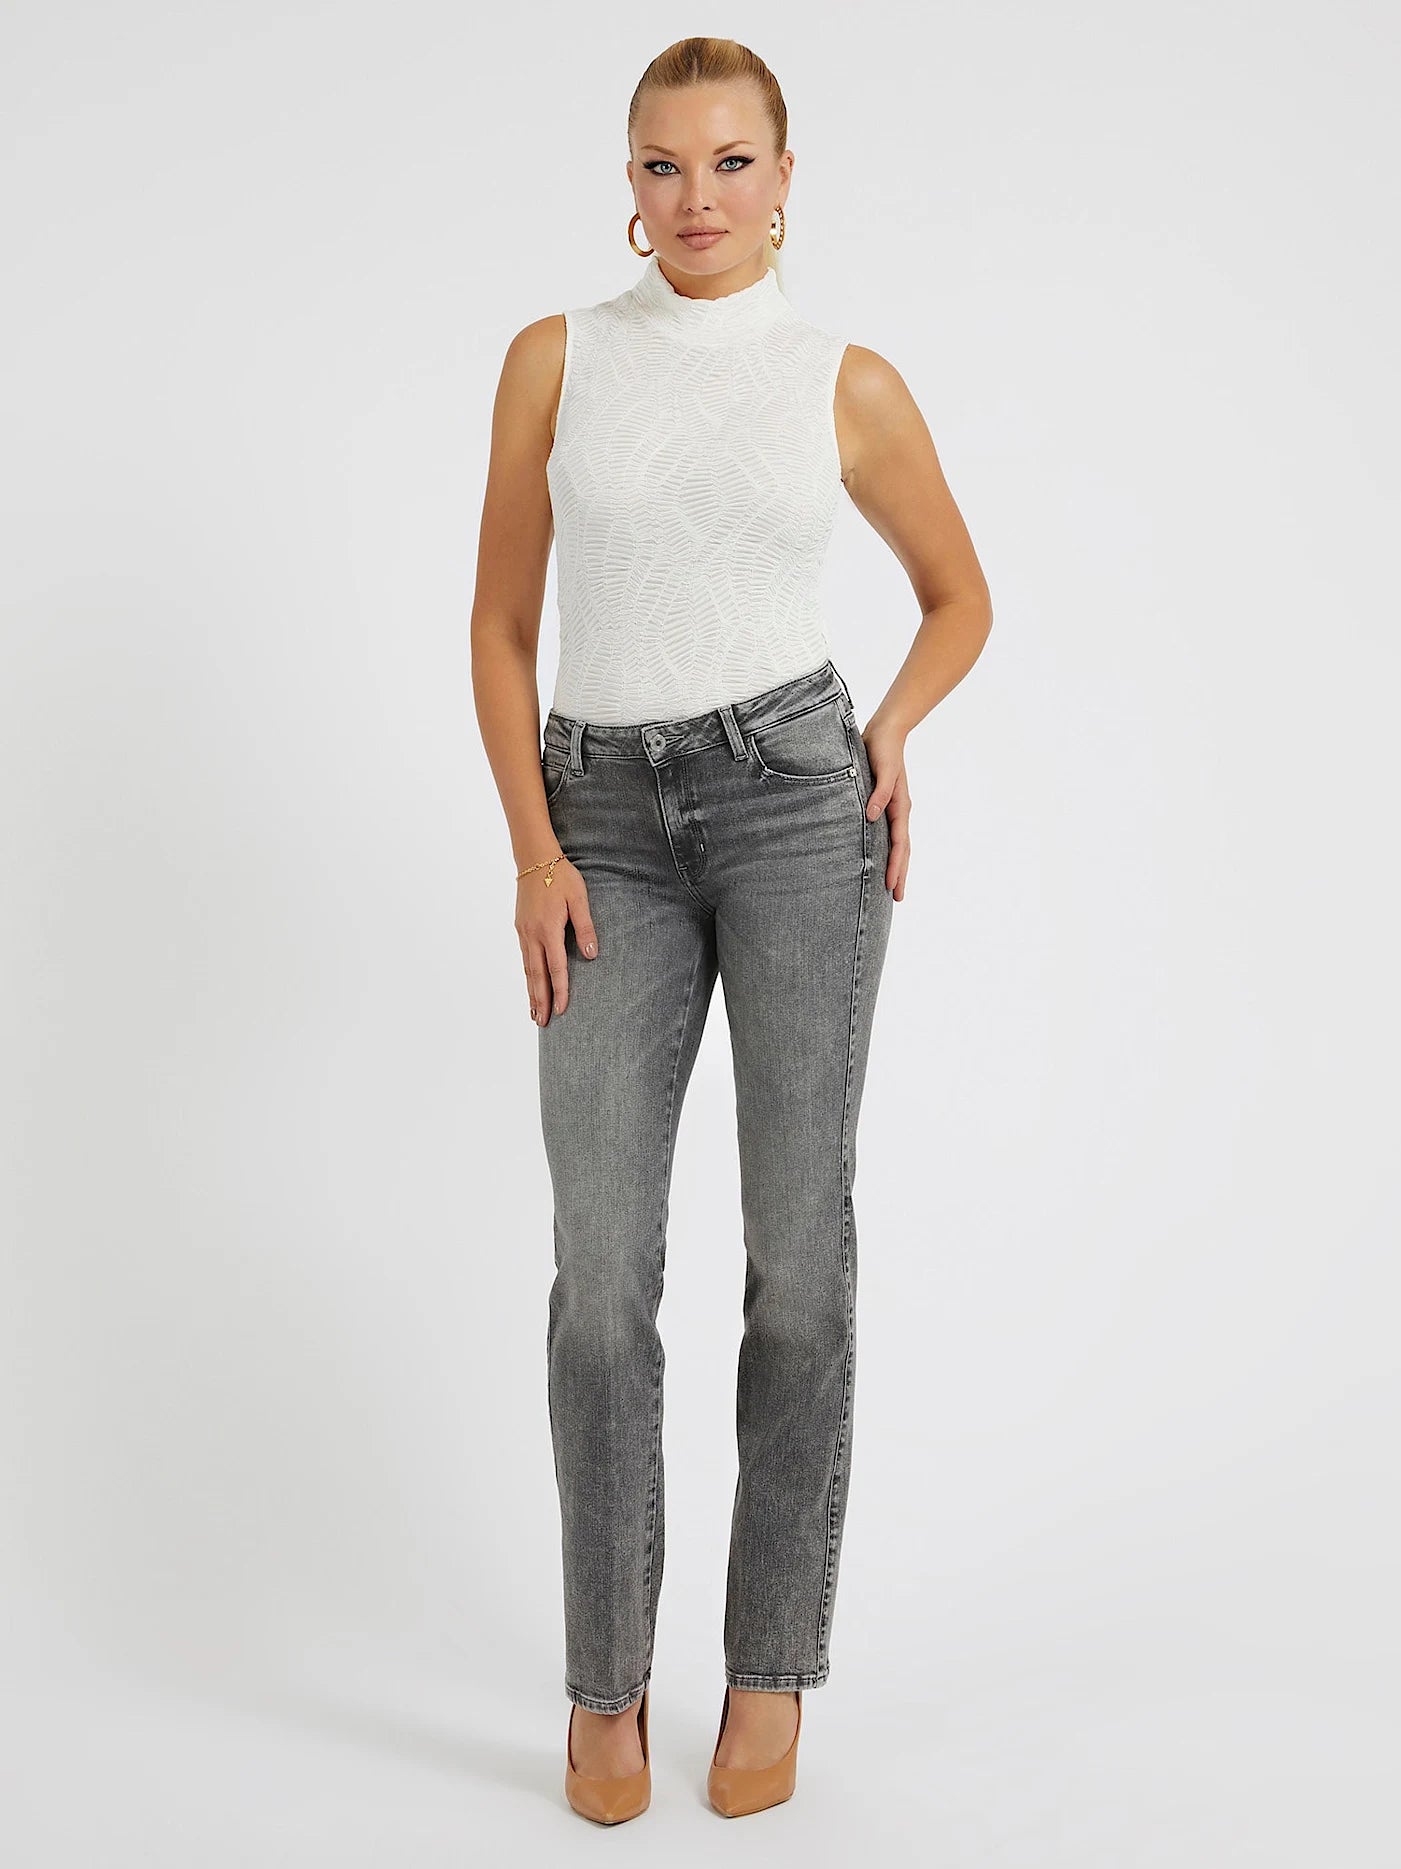 Guess Damen Jeans Straight Fit